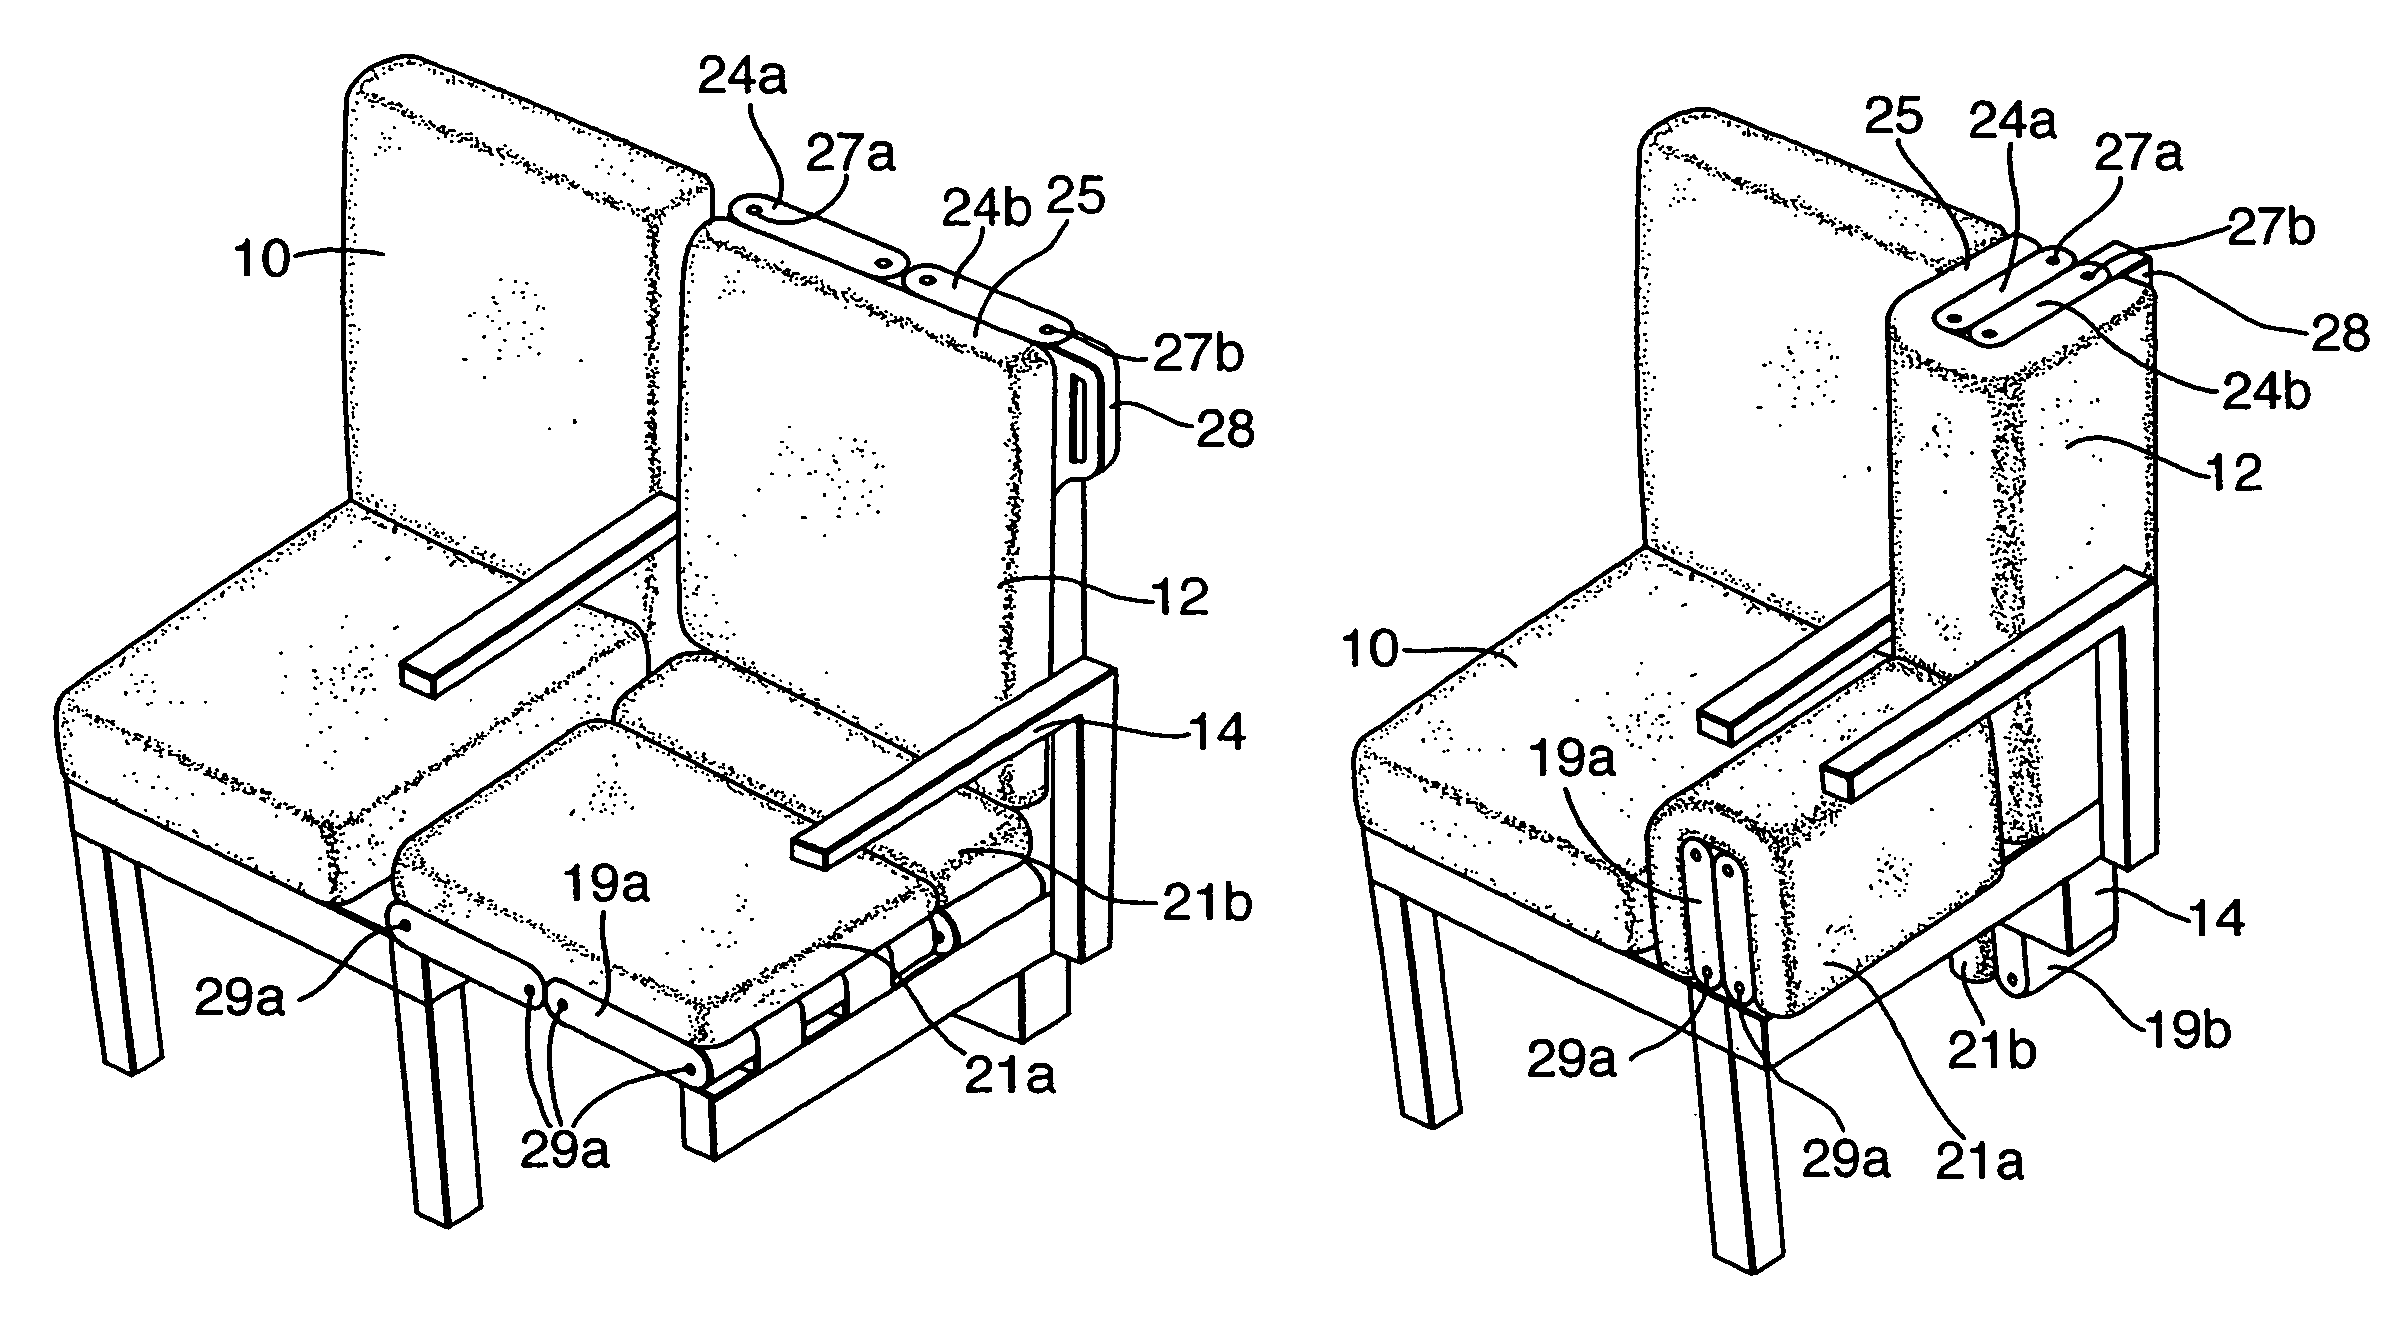 Aircraft seat assembly